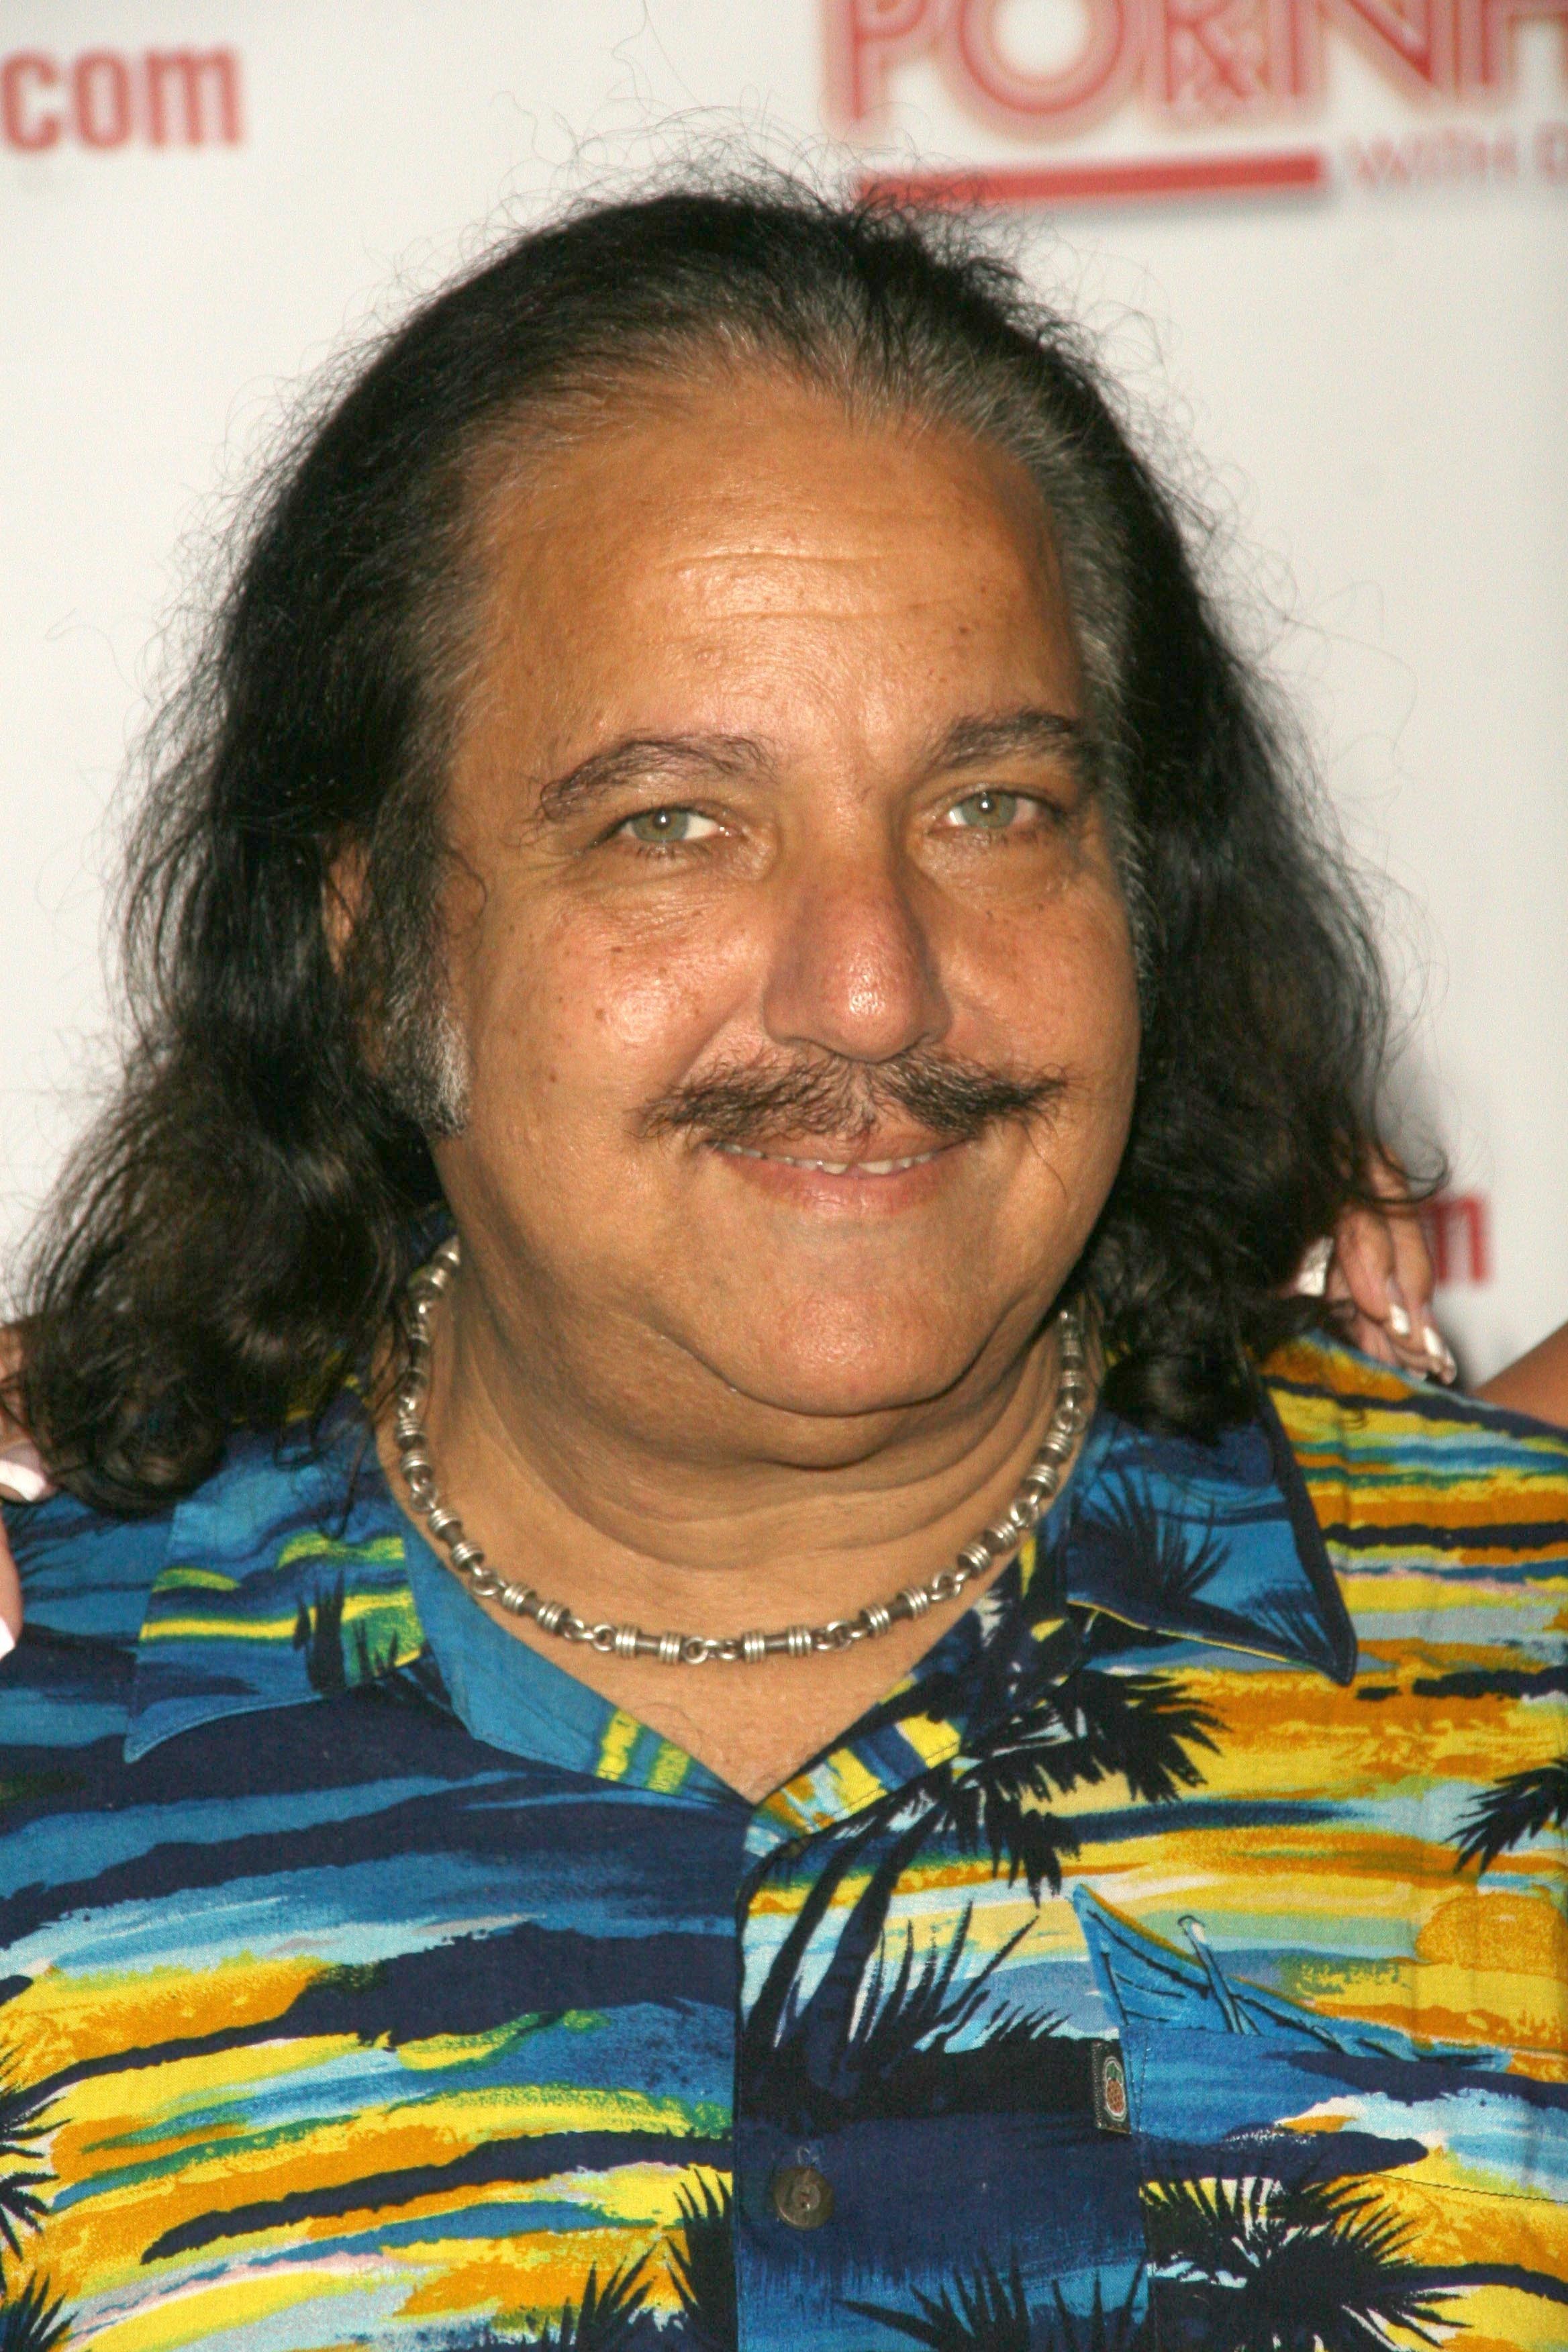 Update Porn Star Ron Jeremy Pleads Not Guilty Kabc Am 